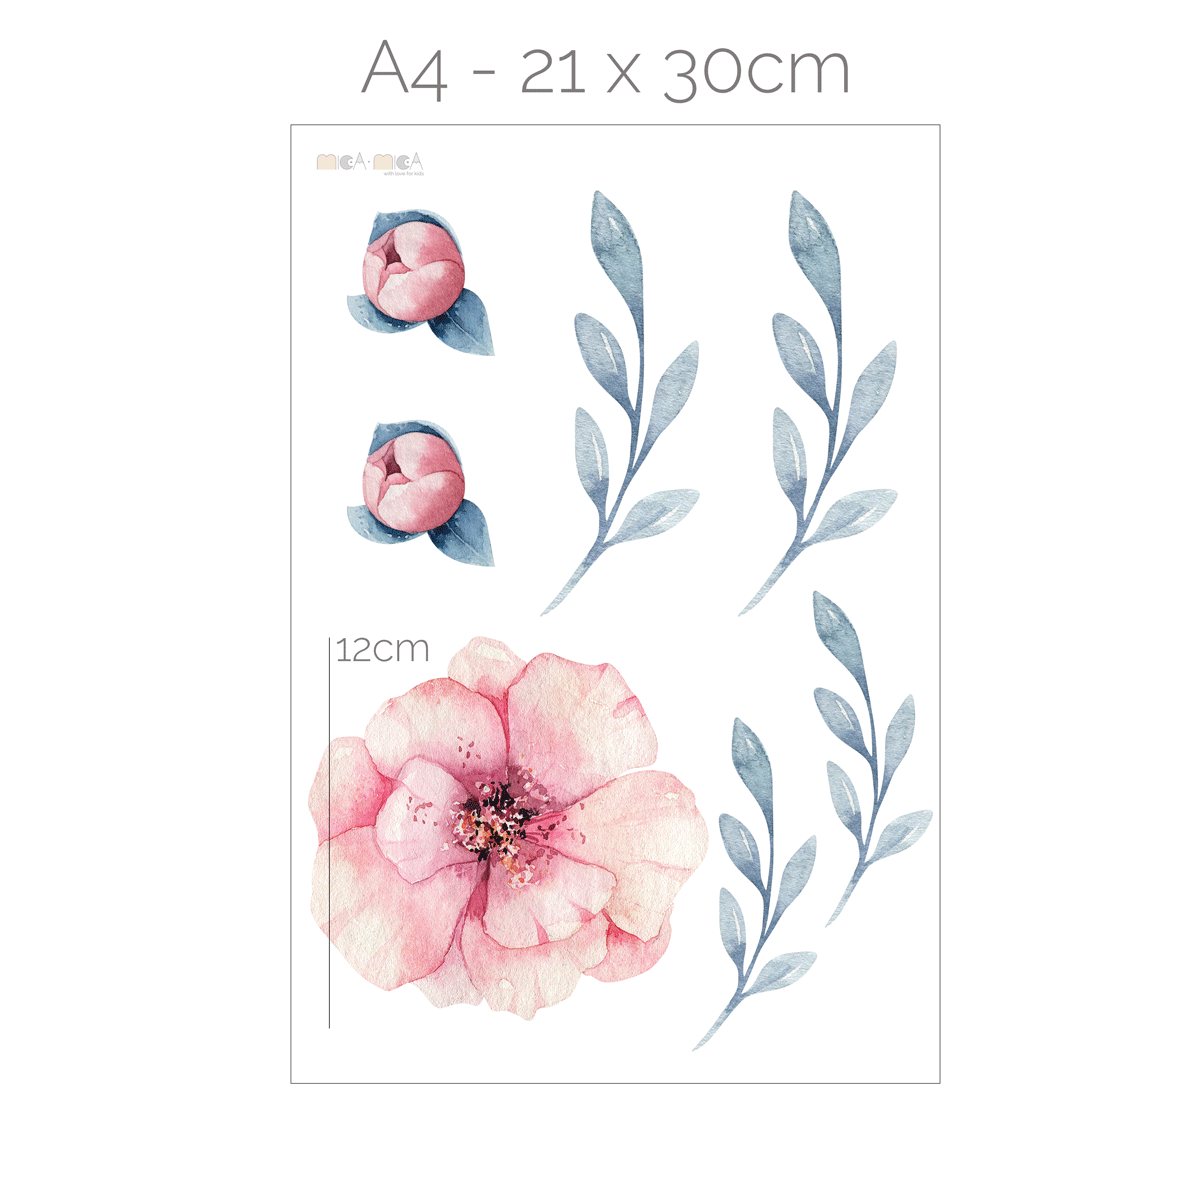 Flower wall stickers - Watercolour roses